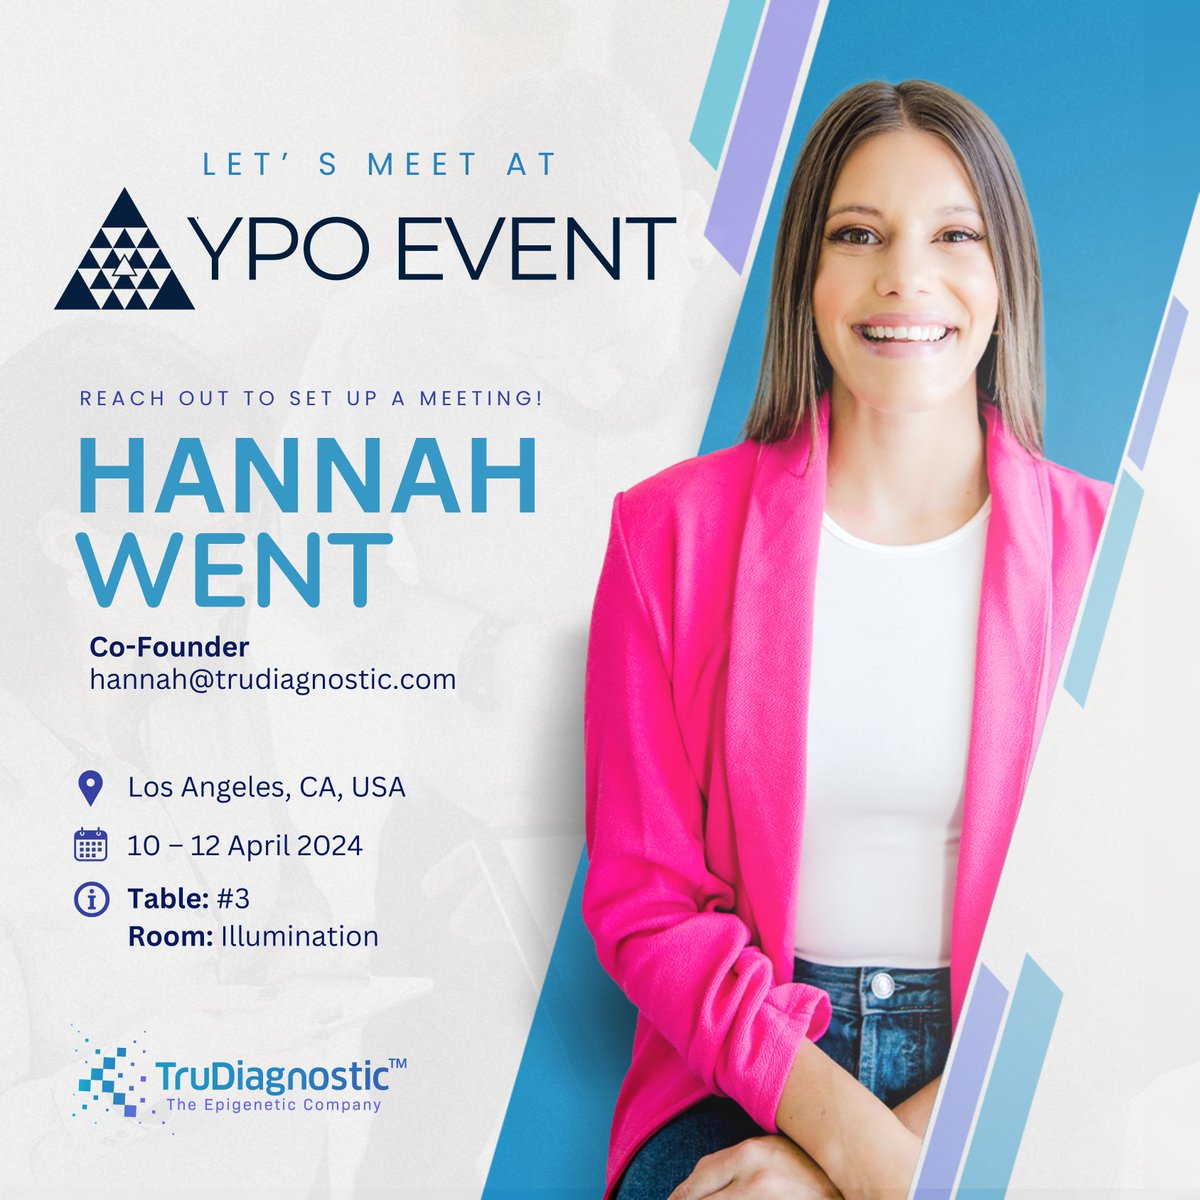 The @TruDiagnostic team will be attending the @YPO 
Health and Wellness Network Longevity Summit from April 10th-12th at the Luskin Conference Center in LA.

@RyanSmithEpiAge  and I are looking forward to meeting you! If you're interested in chatting, just shoot me a message.